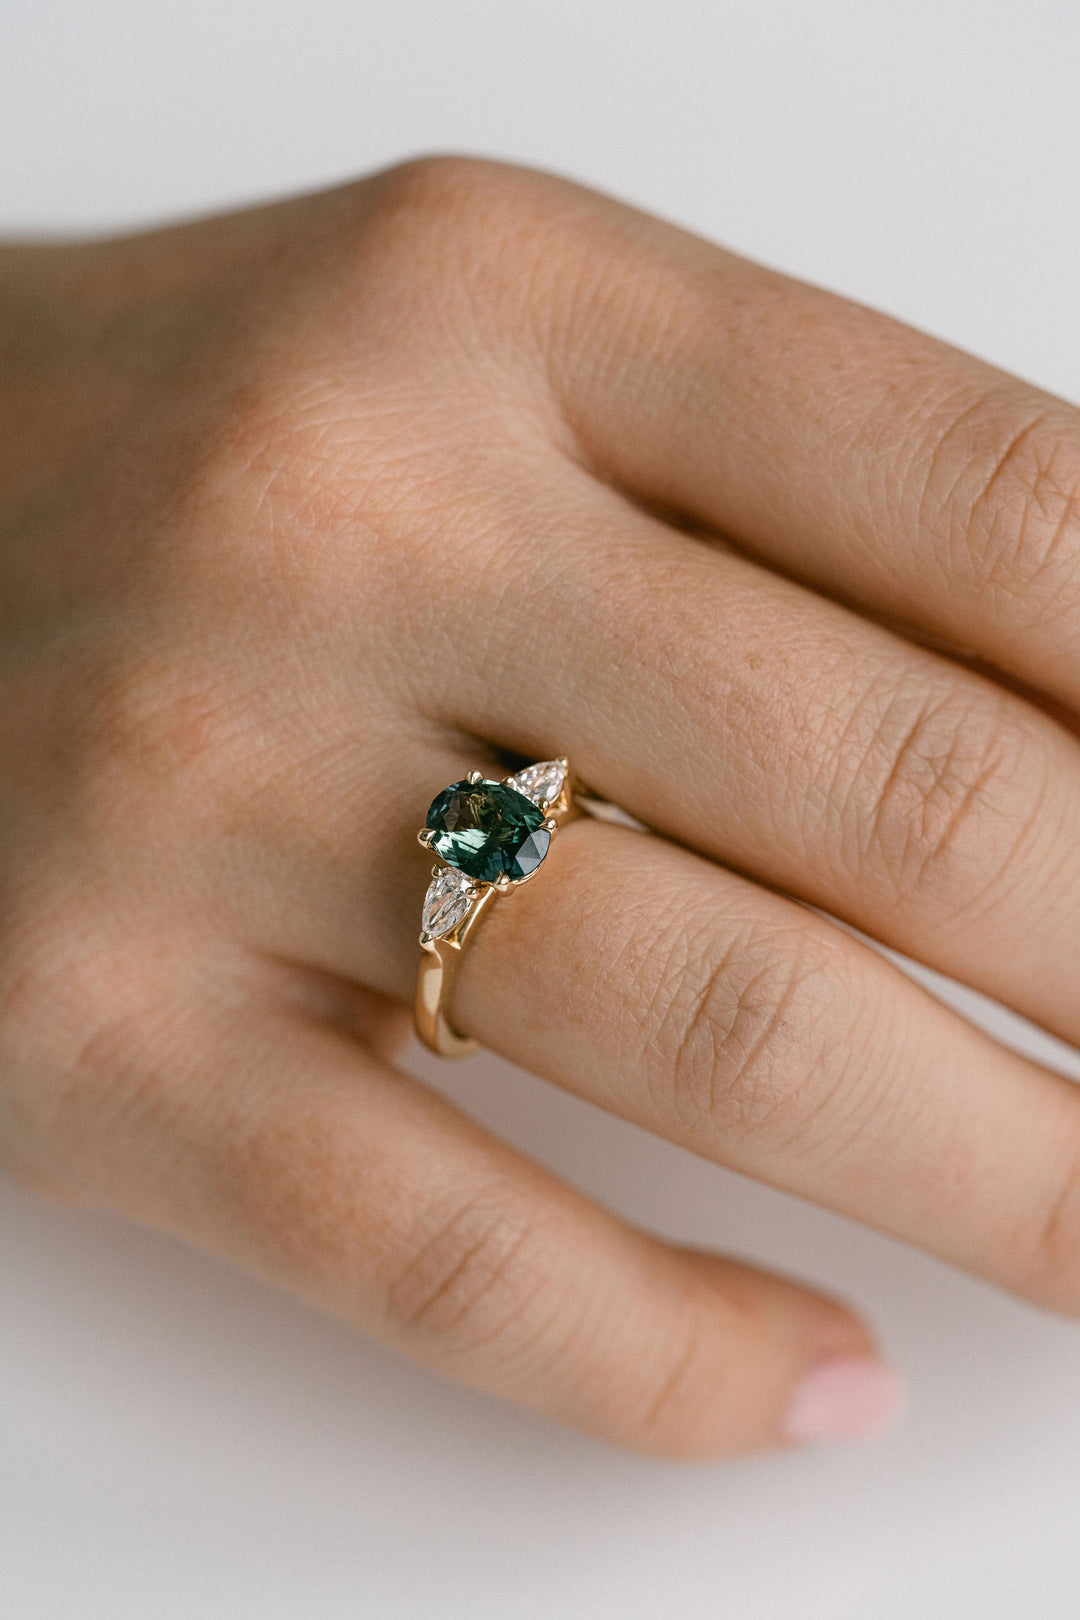 1.59ct. Oval Blue-Green Sri Lankan Sapphire Engagement Ring With Pear Shape Diamond Accents, 14k Yellow Gold